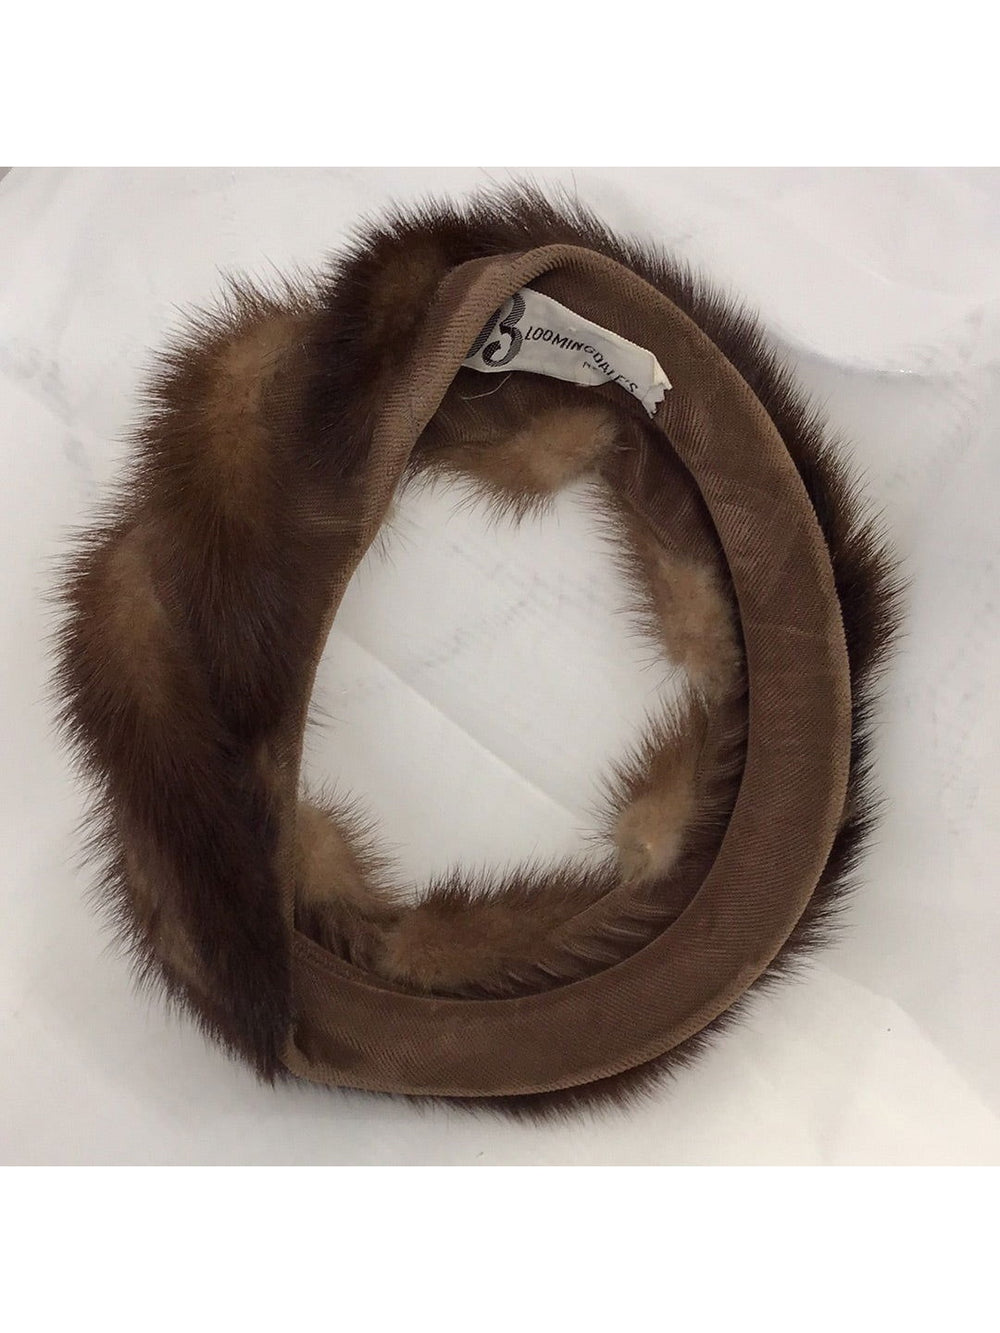 Vintage Bloomingdale’s Union Made Spiral Mink Fur Pillbox Circle Hat #546694 - The Kennedy Collective Thrift - 